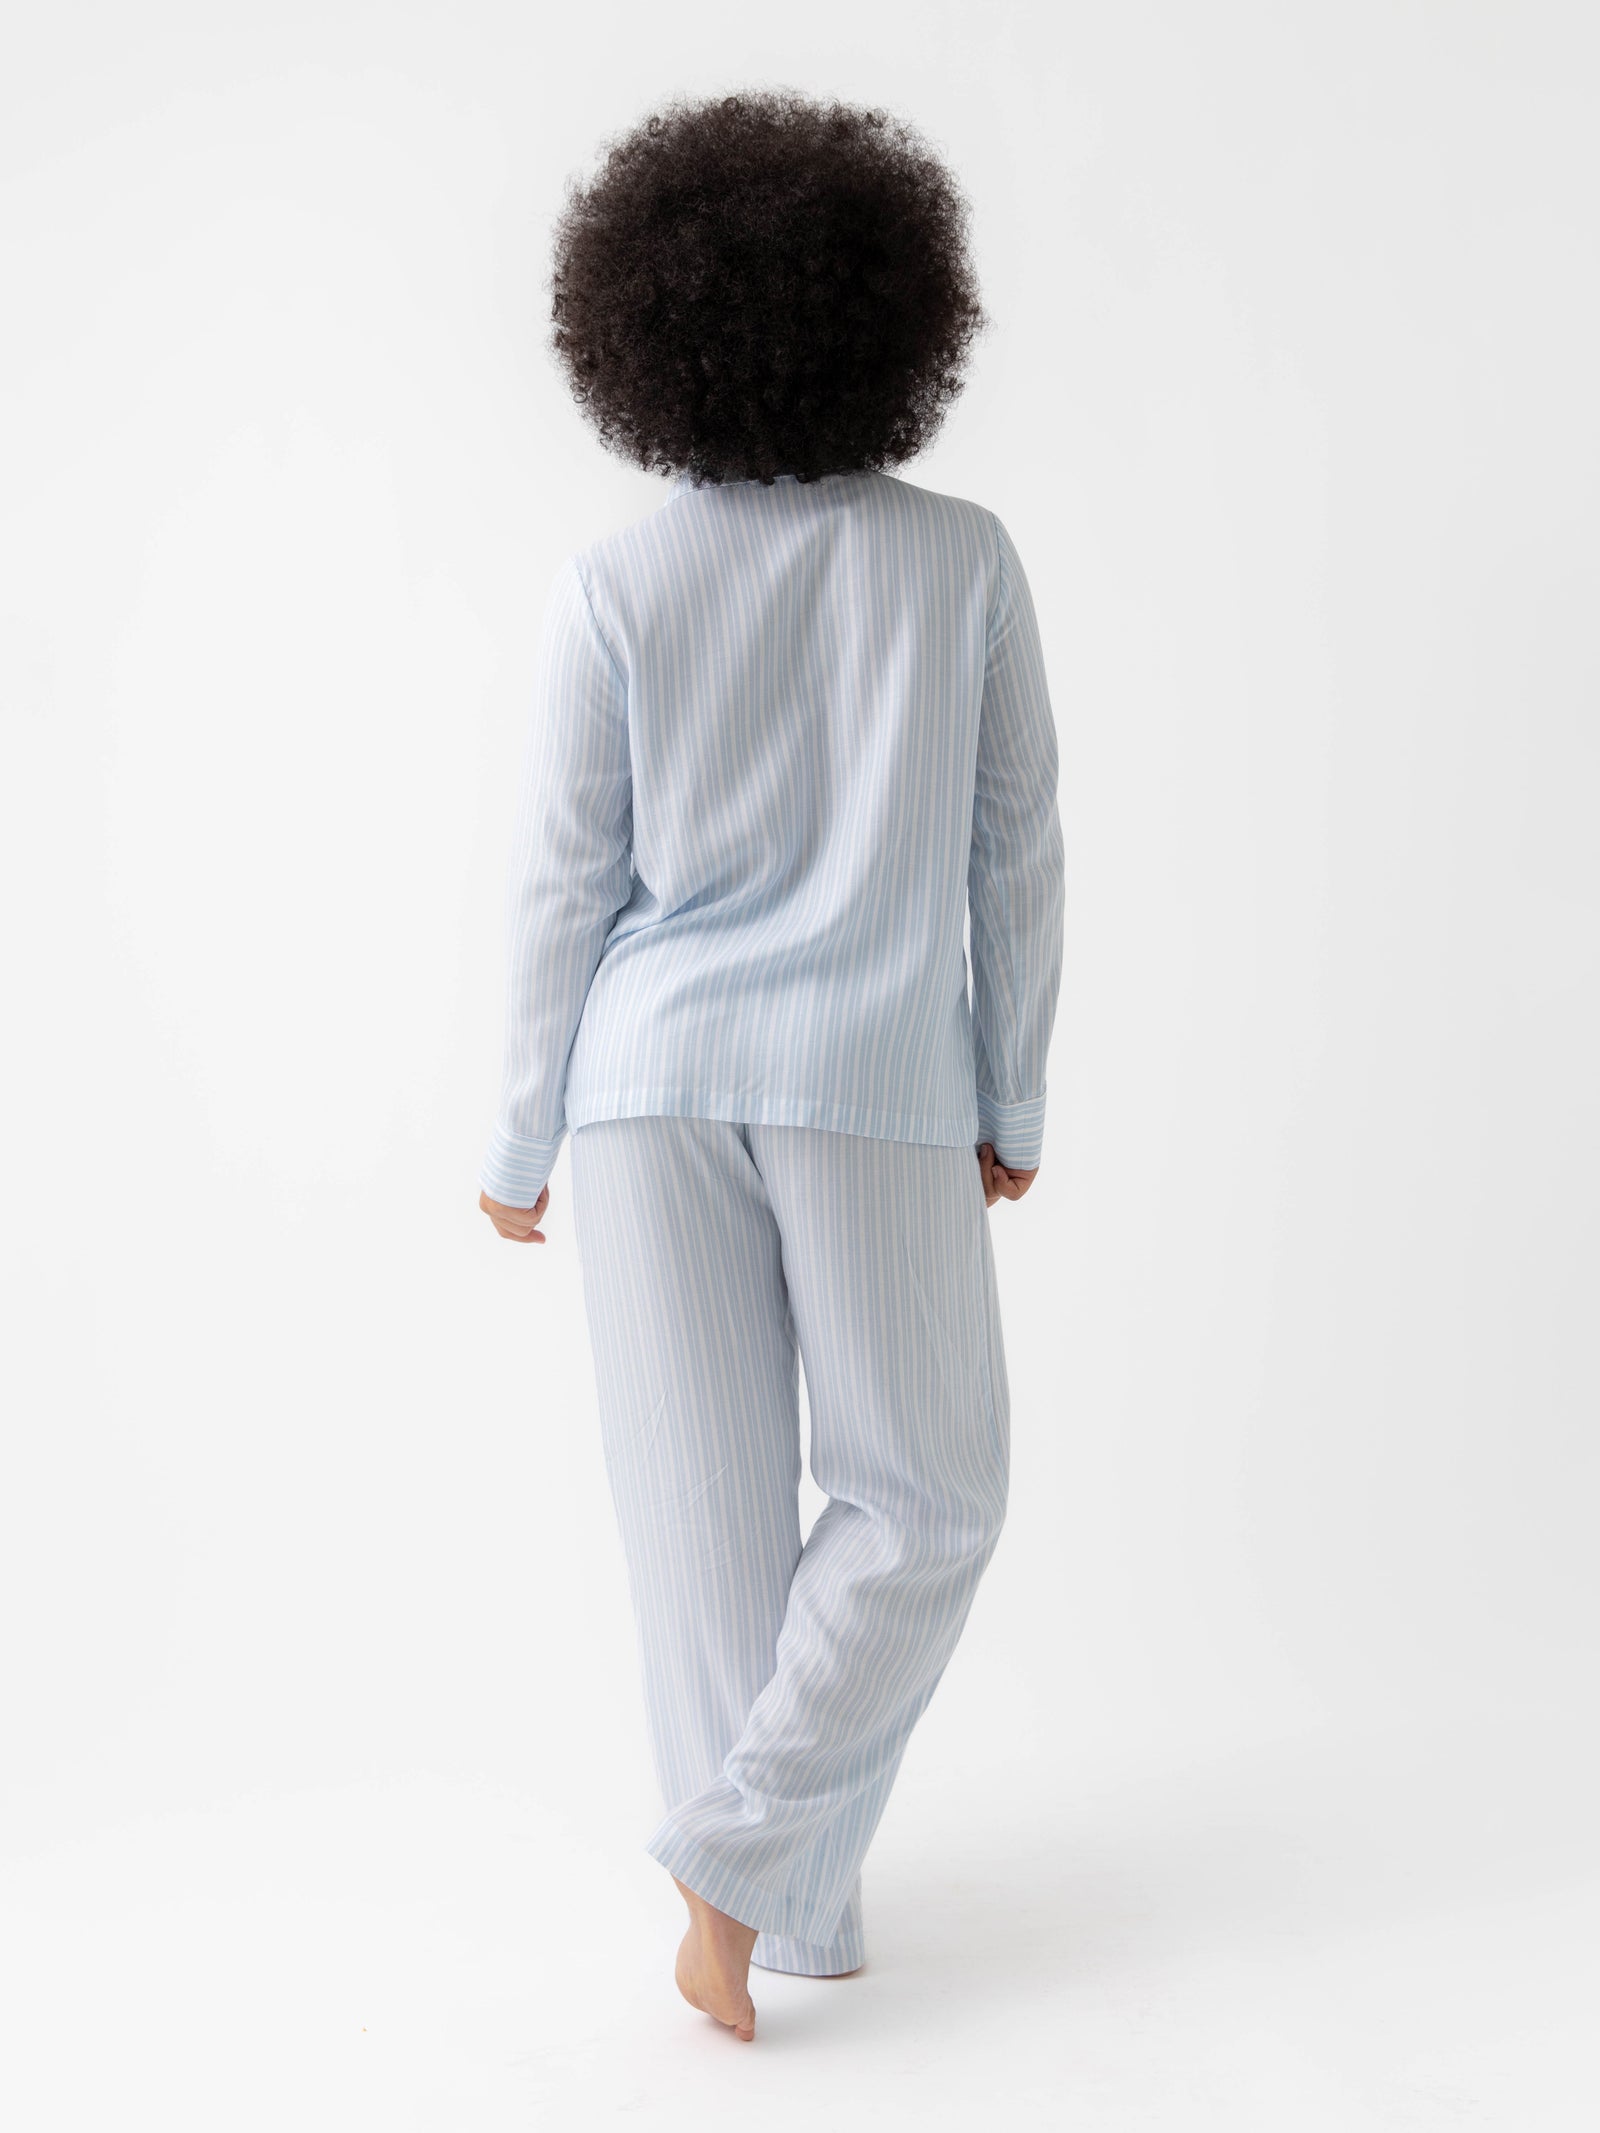 Woman wearing Spring Blue Stripe soft woven pajamas with white background 